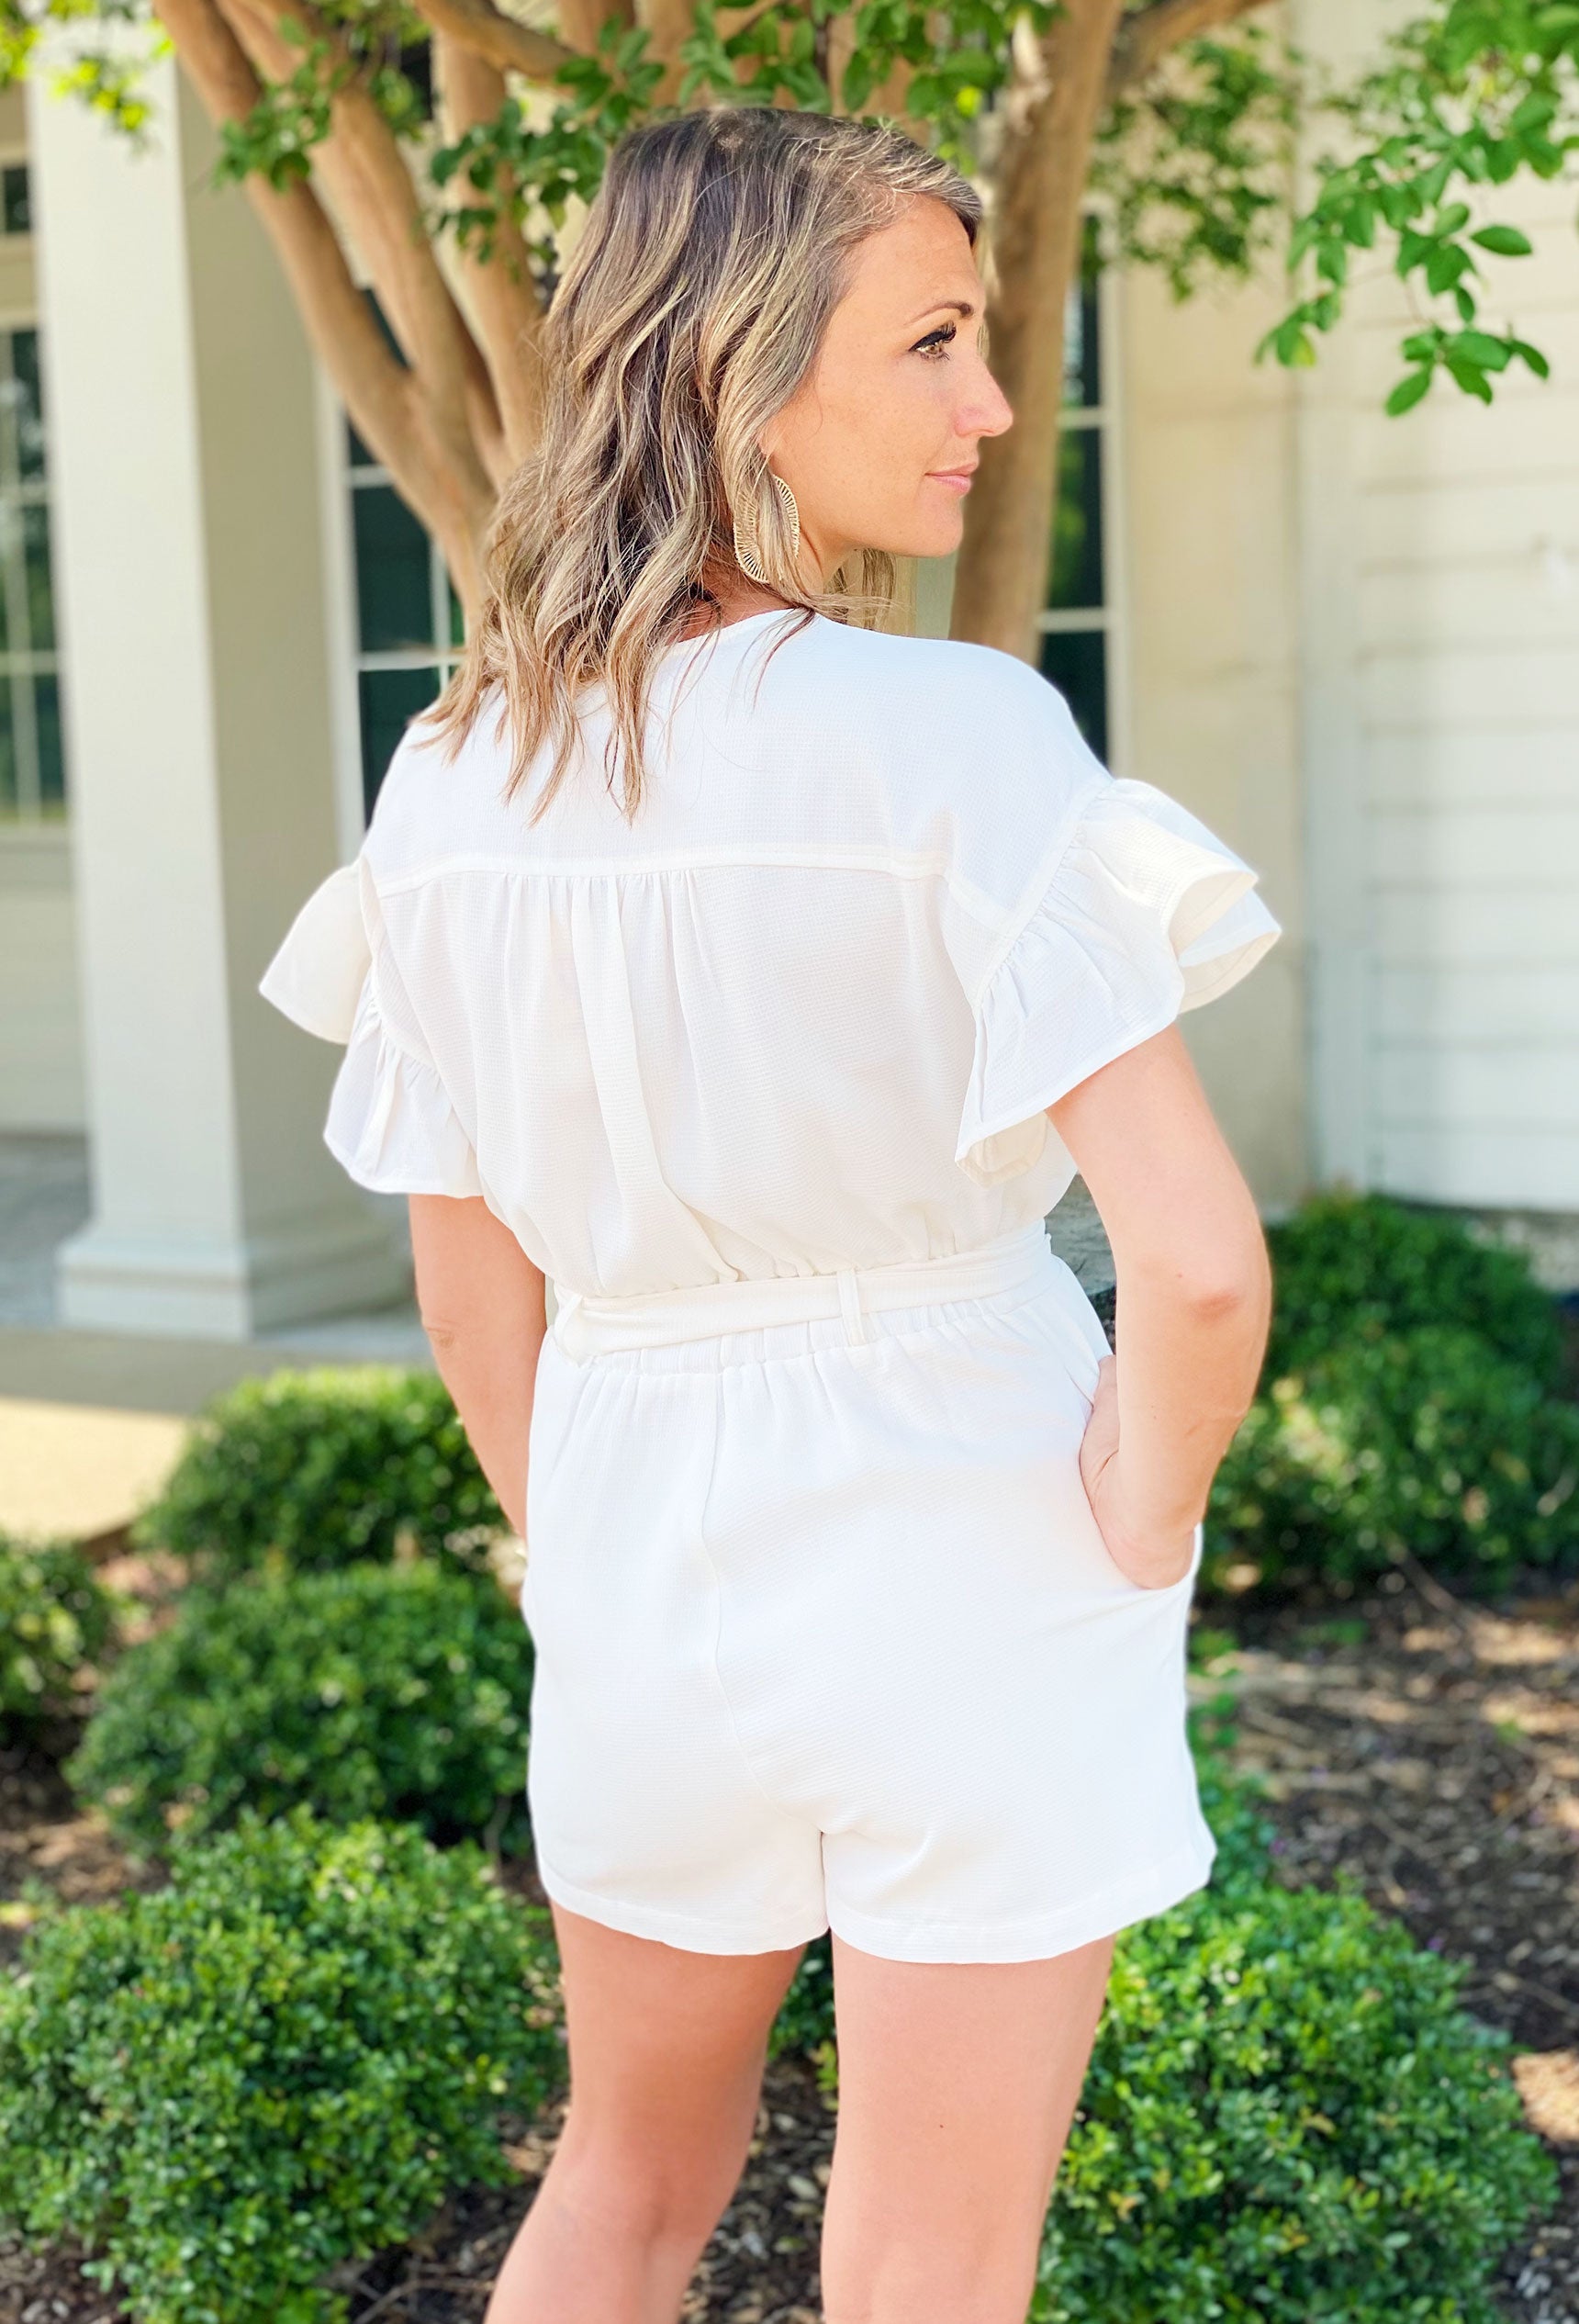 The Coast Is Calling Romper. Soft white fabric with a subtle texture, White romper with tortoise shell buttons and a matching belt.